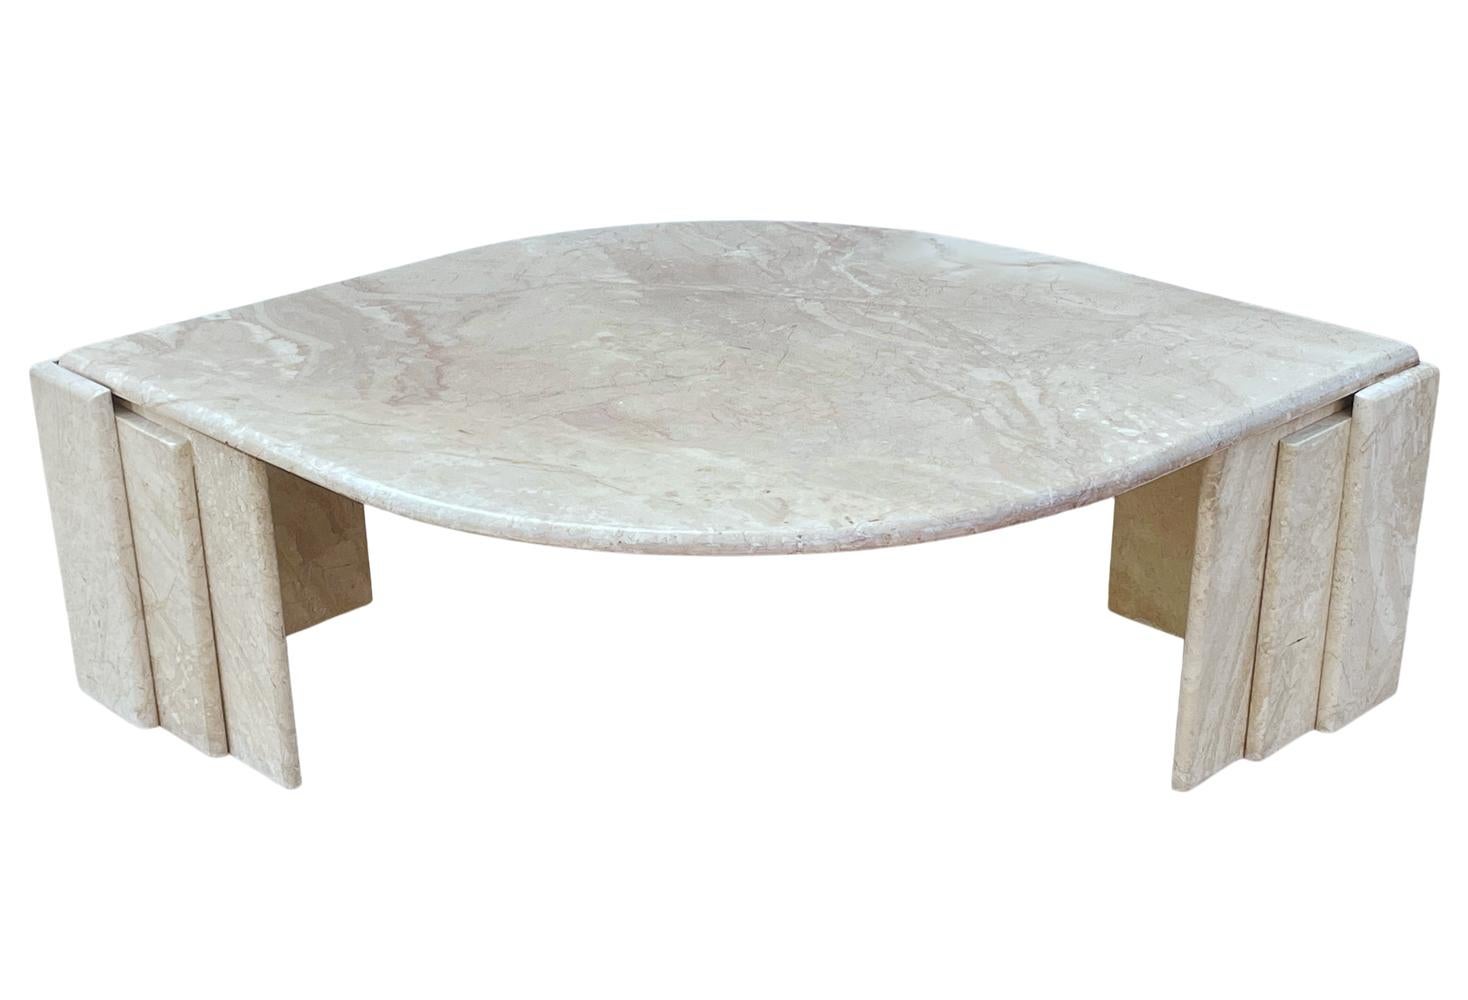 A stunning vintage marble coffee table made in Italy circa 1980's. It features a 3 piece design constructed of thick marble slabs.